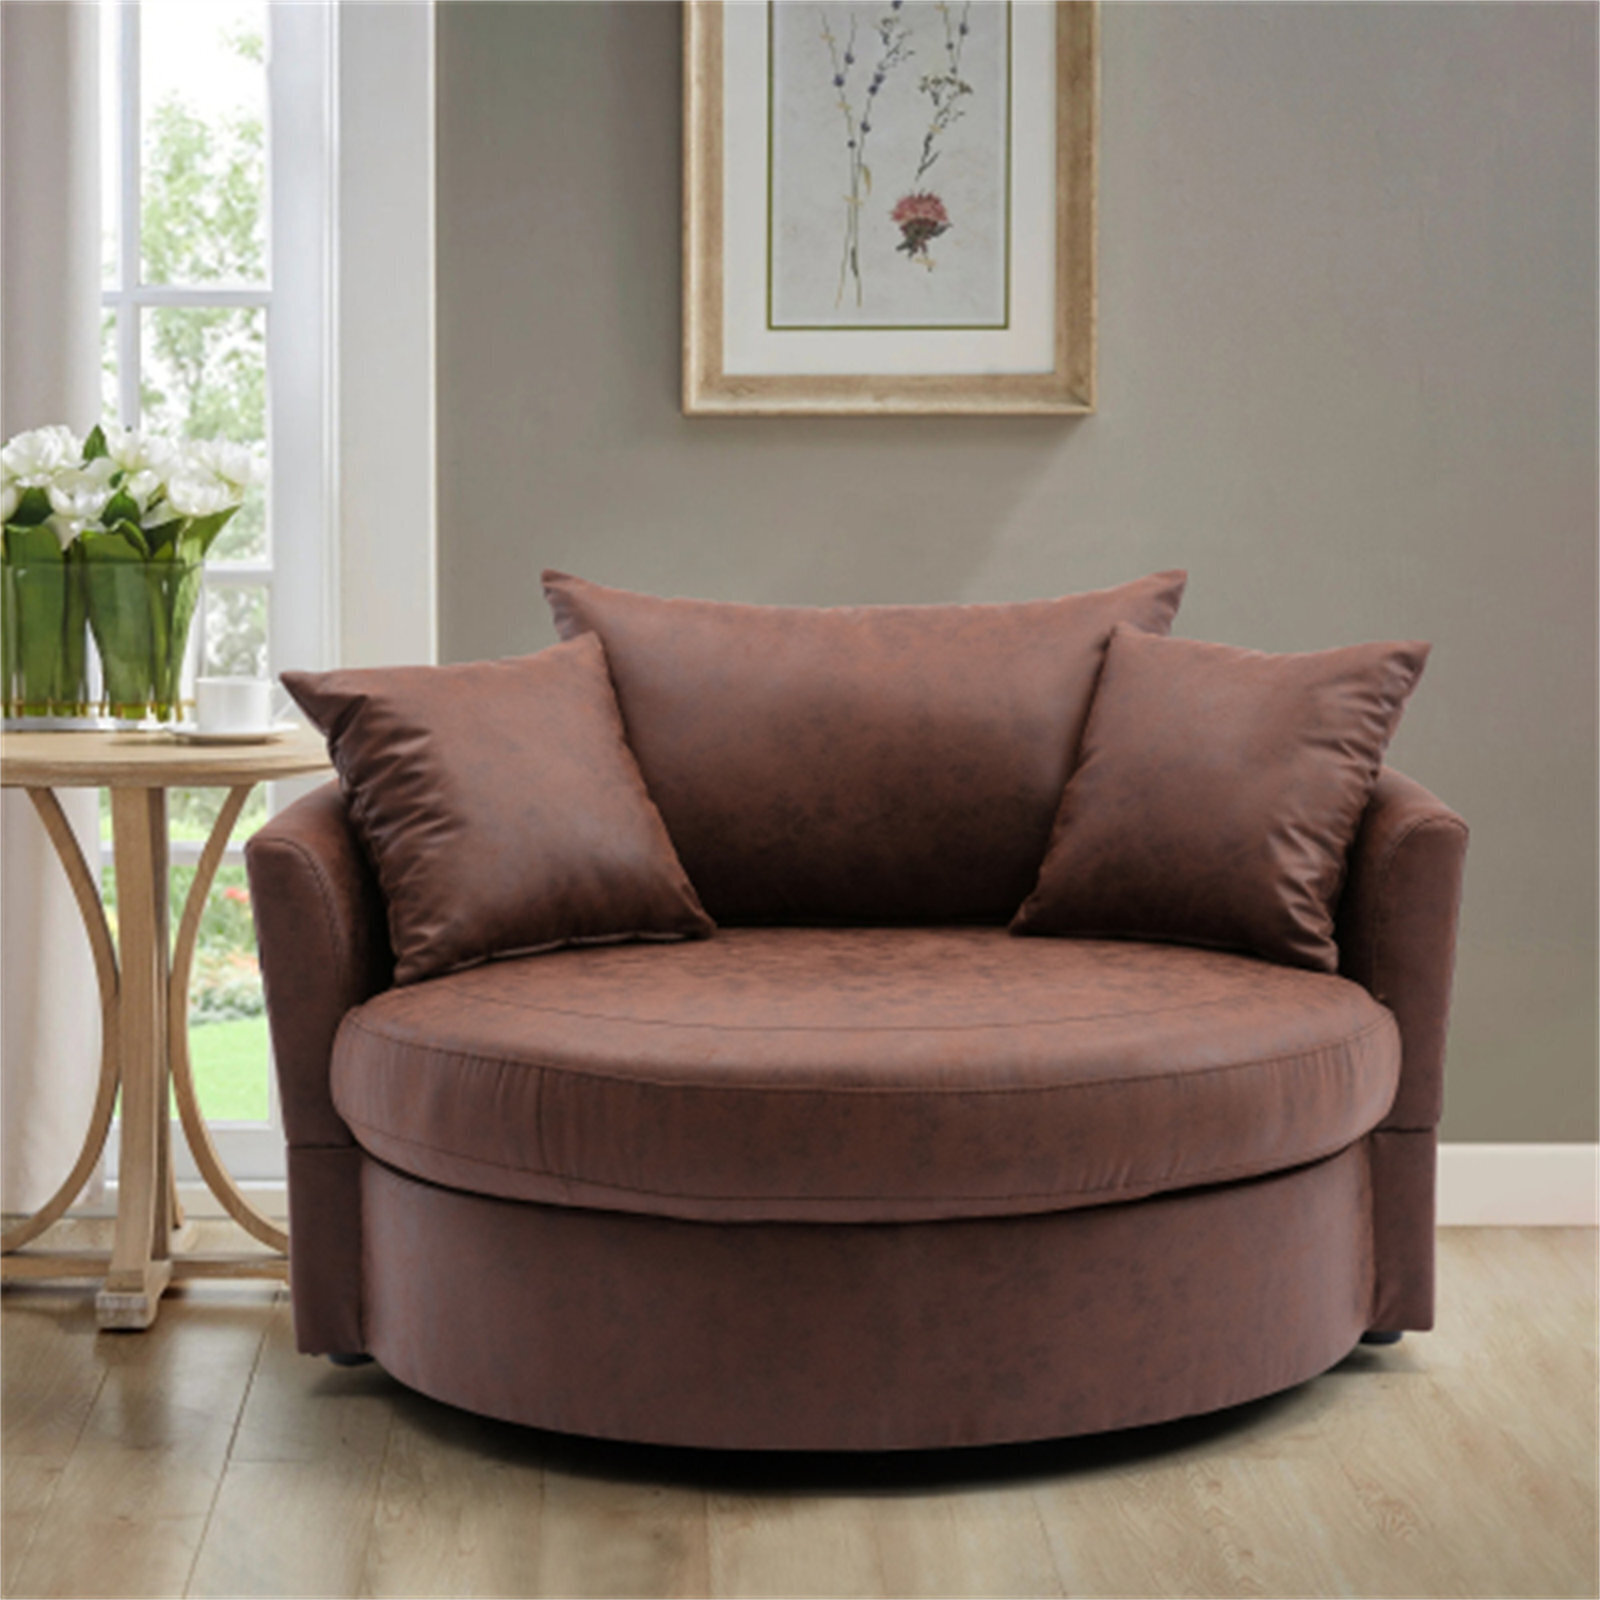 One Color Rustic Round Leather Couch